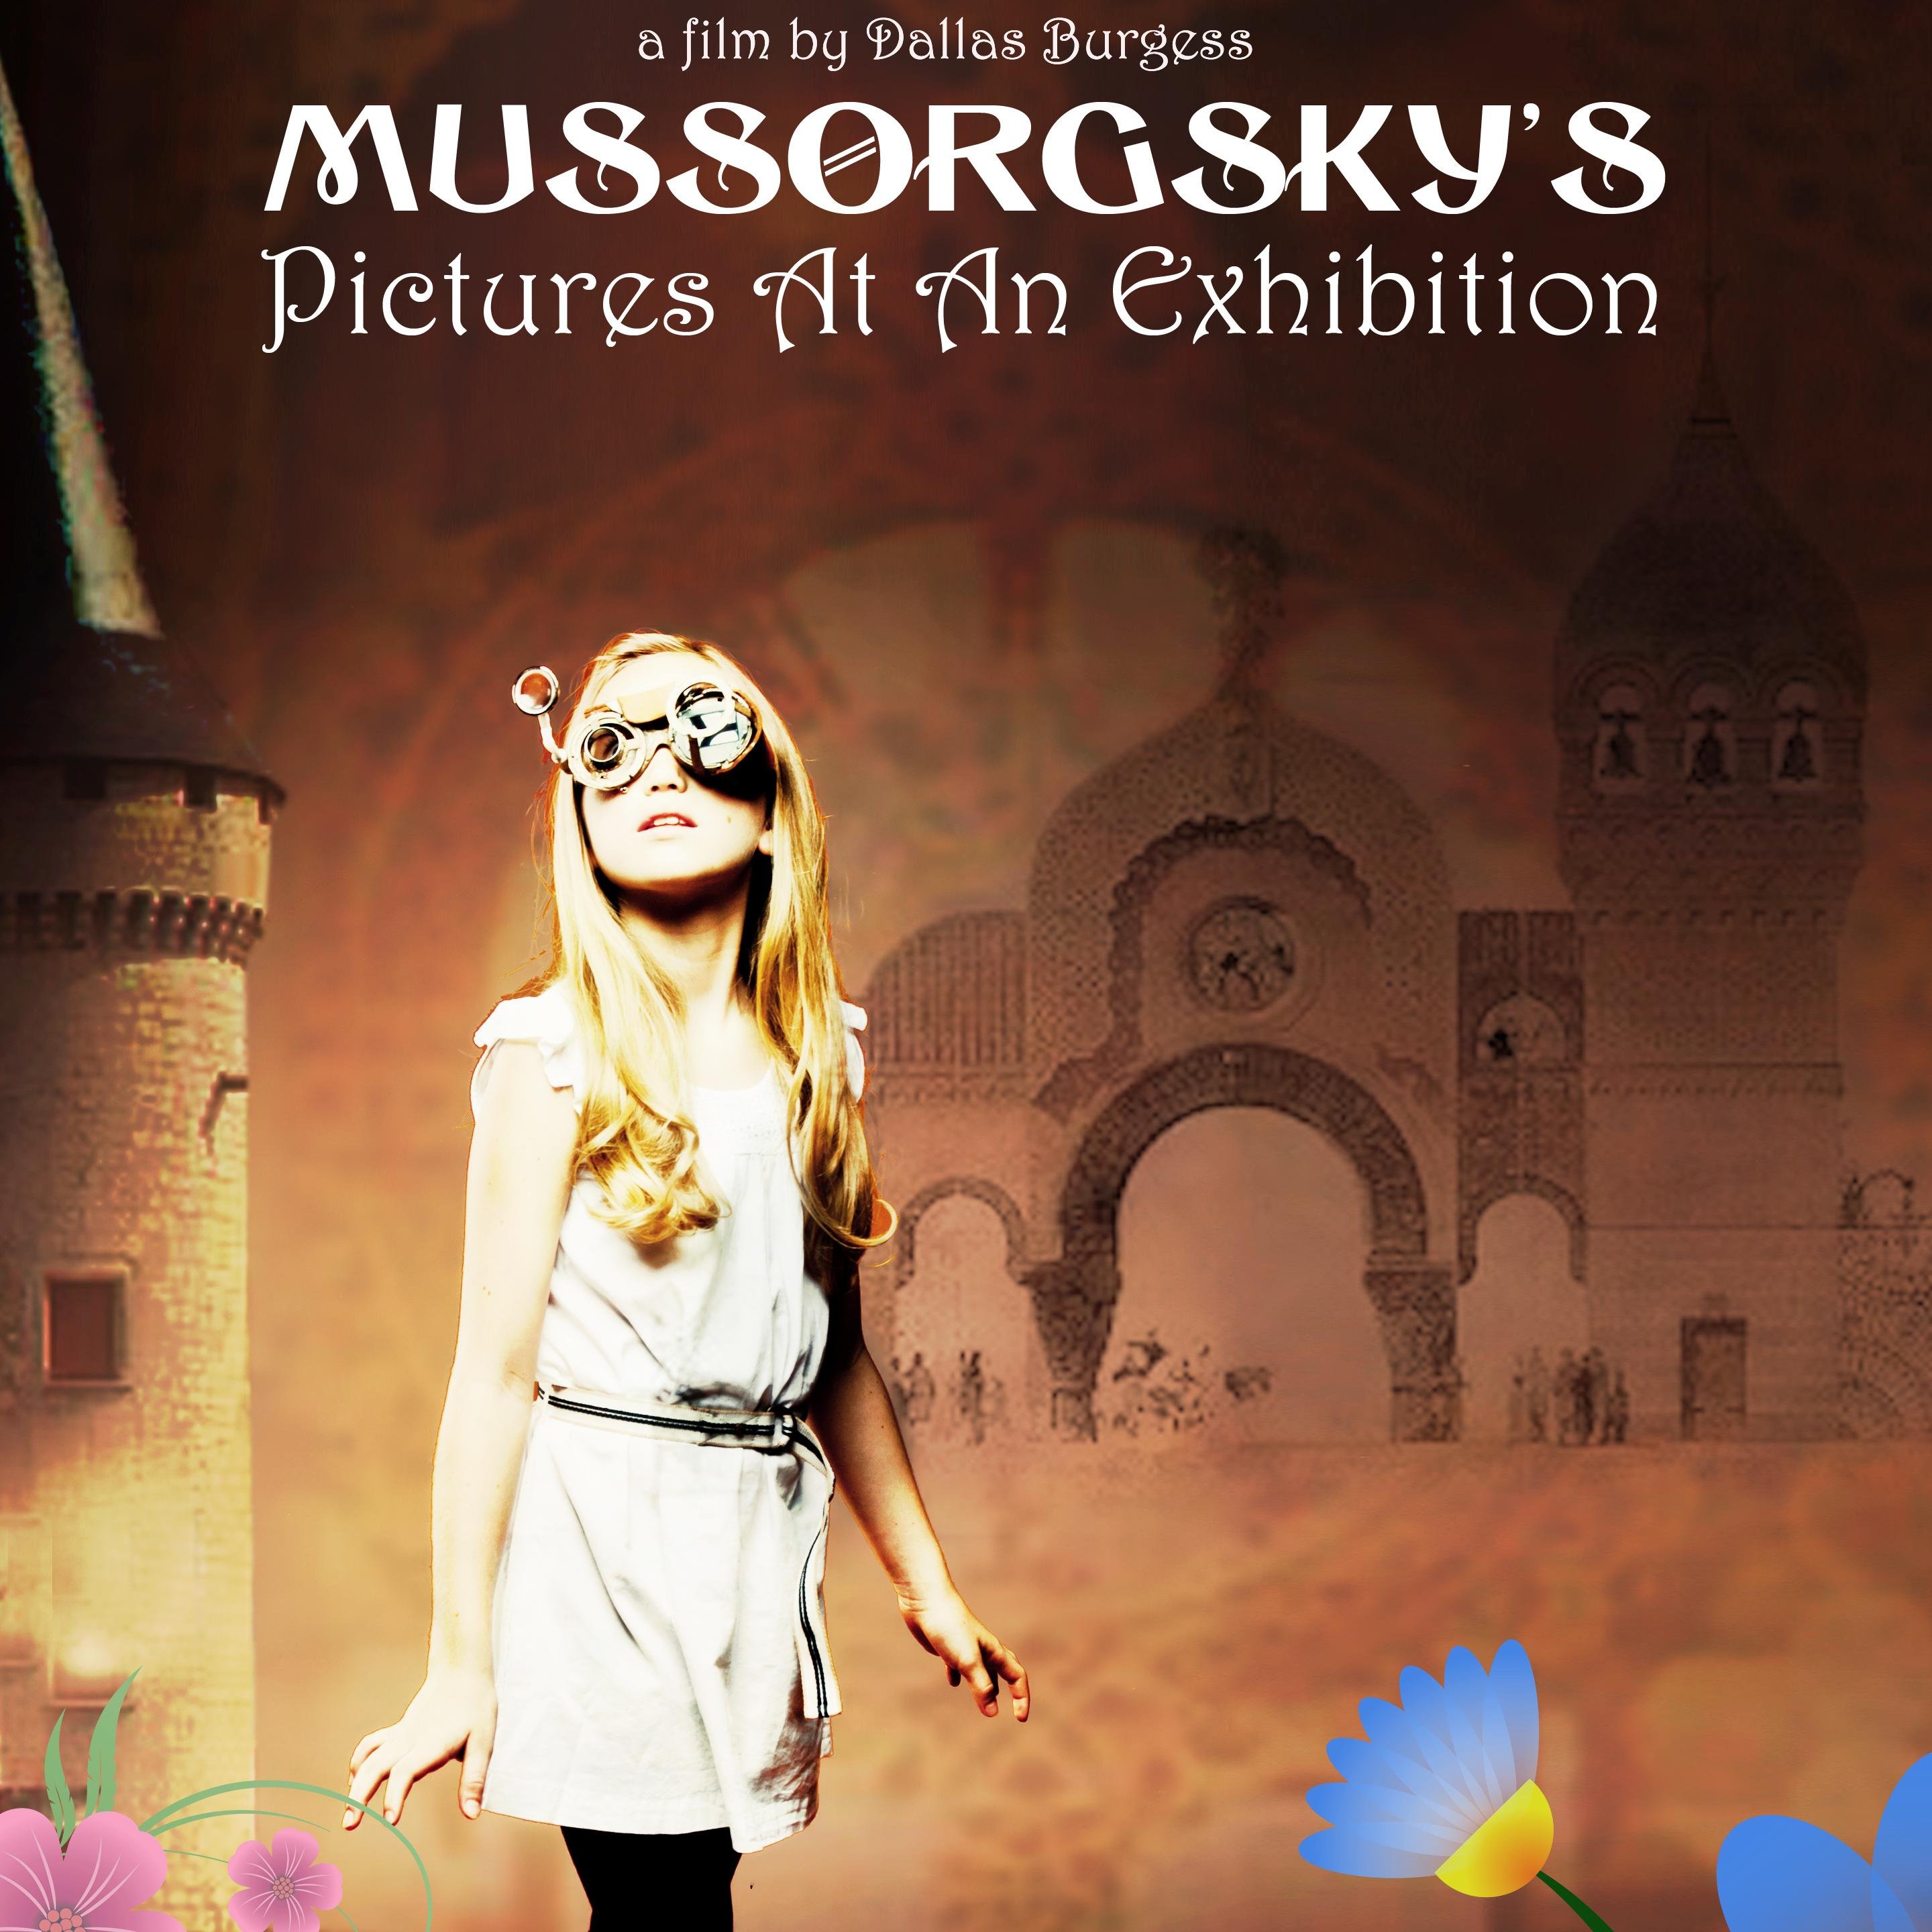 A journey through the eyes of a child as she experiences Mussorgsky's timeless classic in the art that inspired it. #supportindiefilm